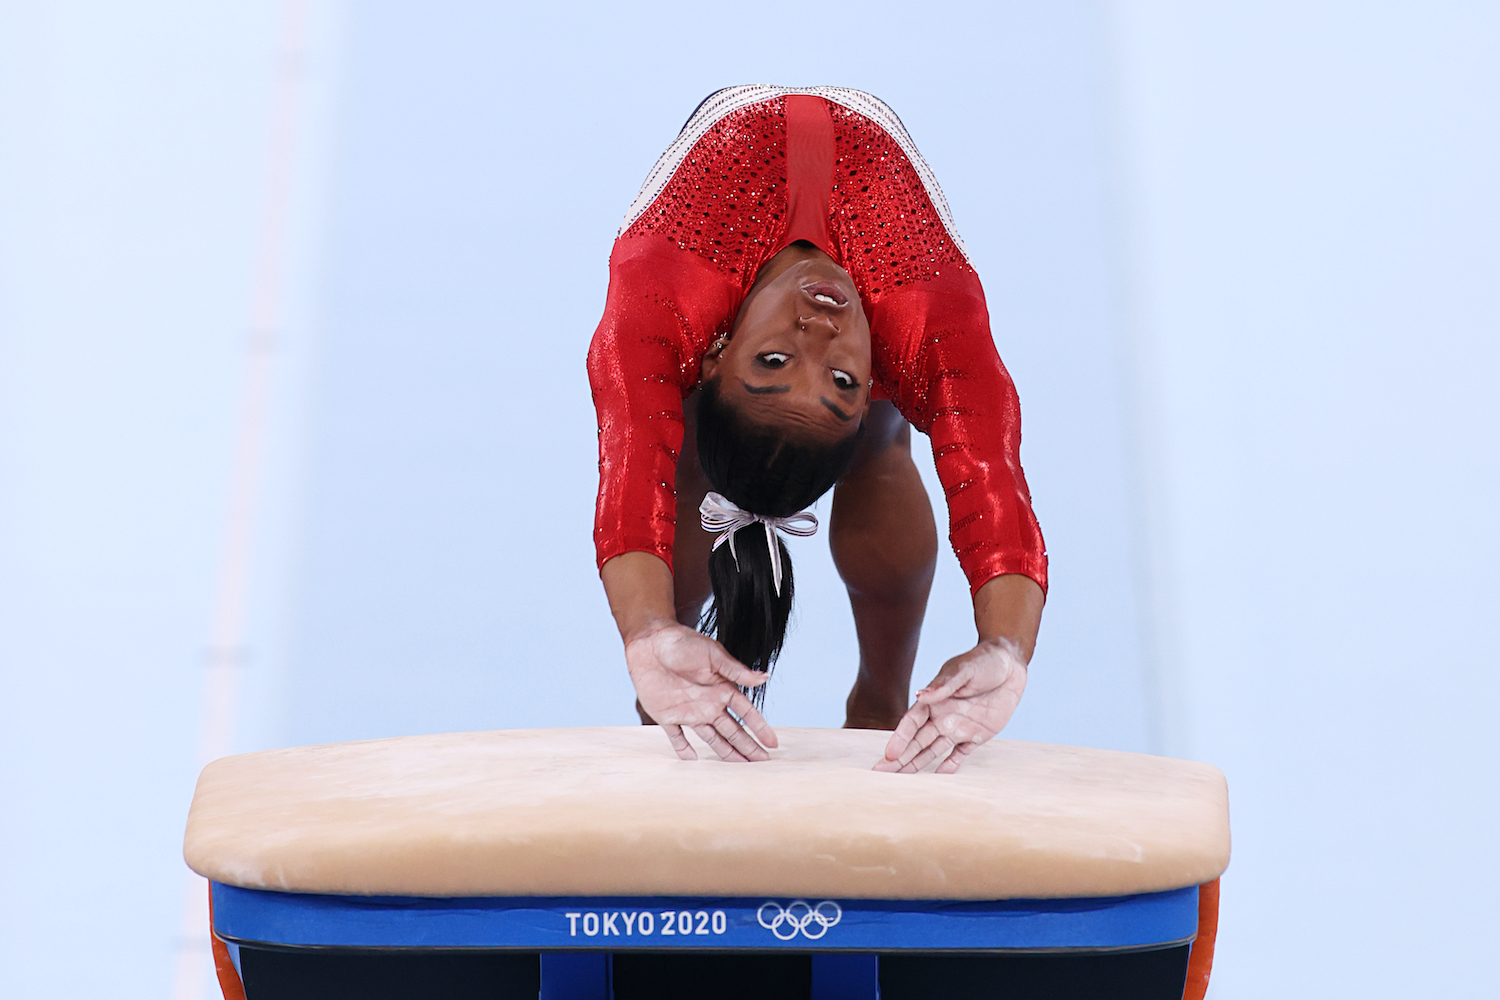 Simone Biles competes in the vault during the 2020 Olympics.